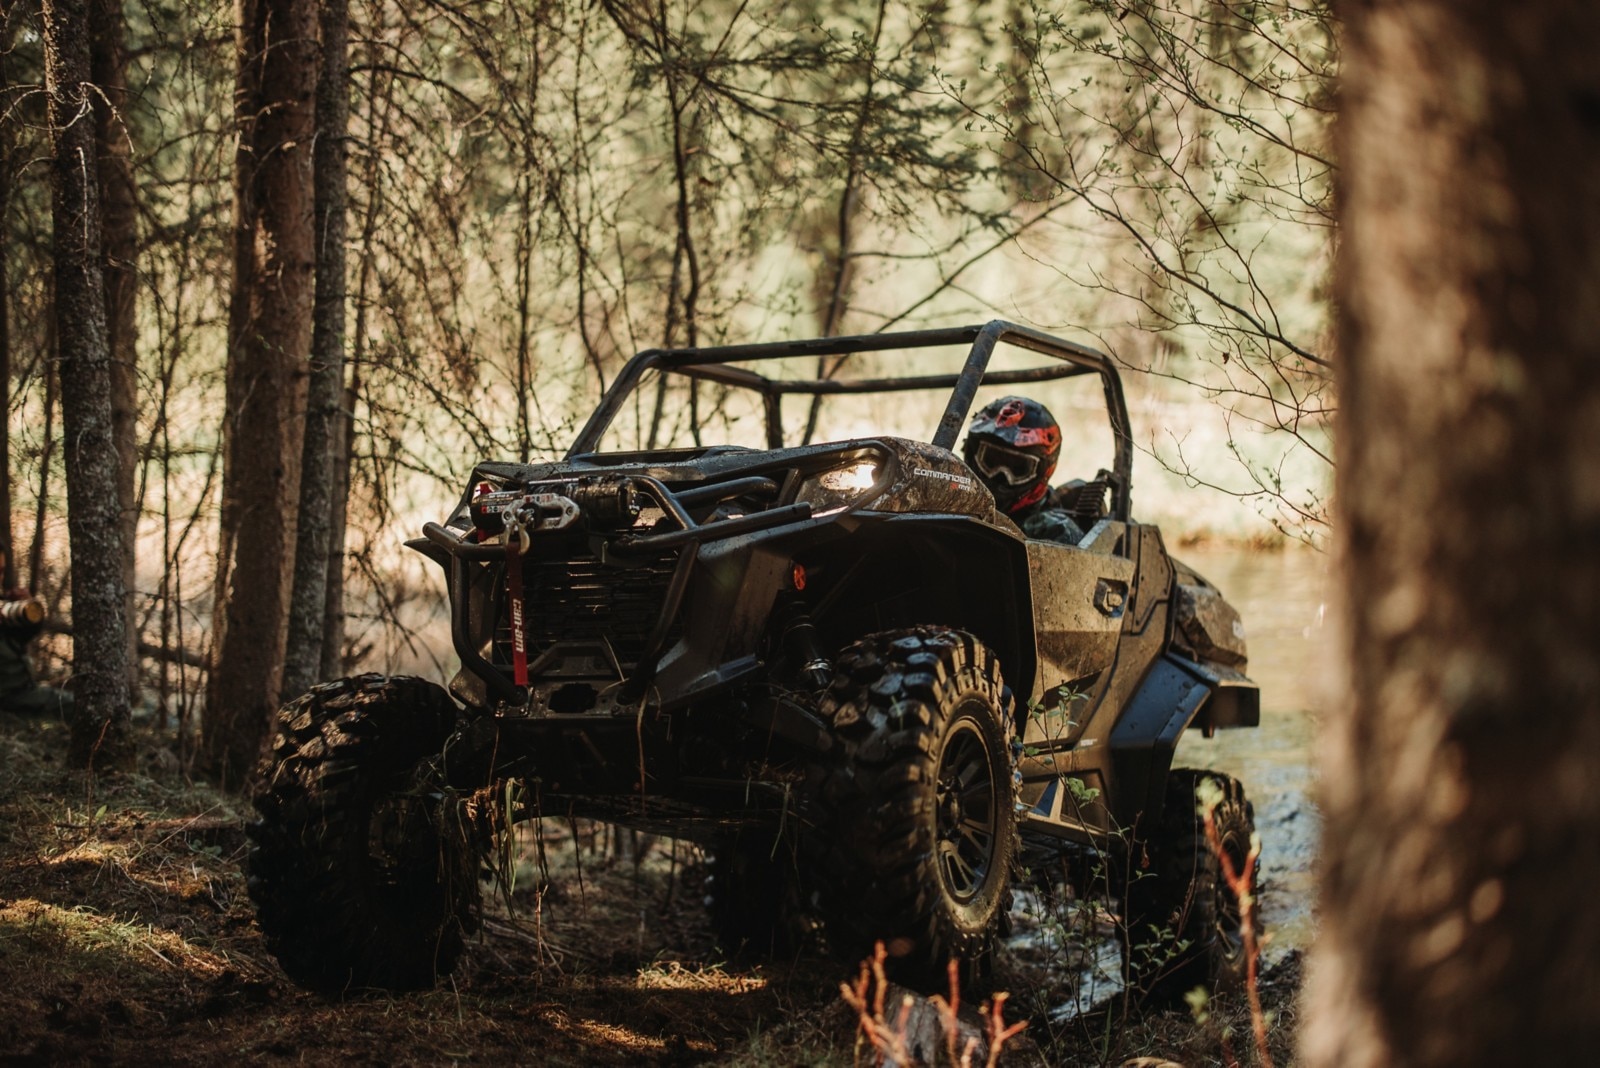 SxS with rider on dirt trail in woods